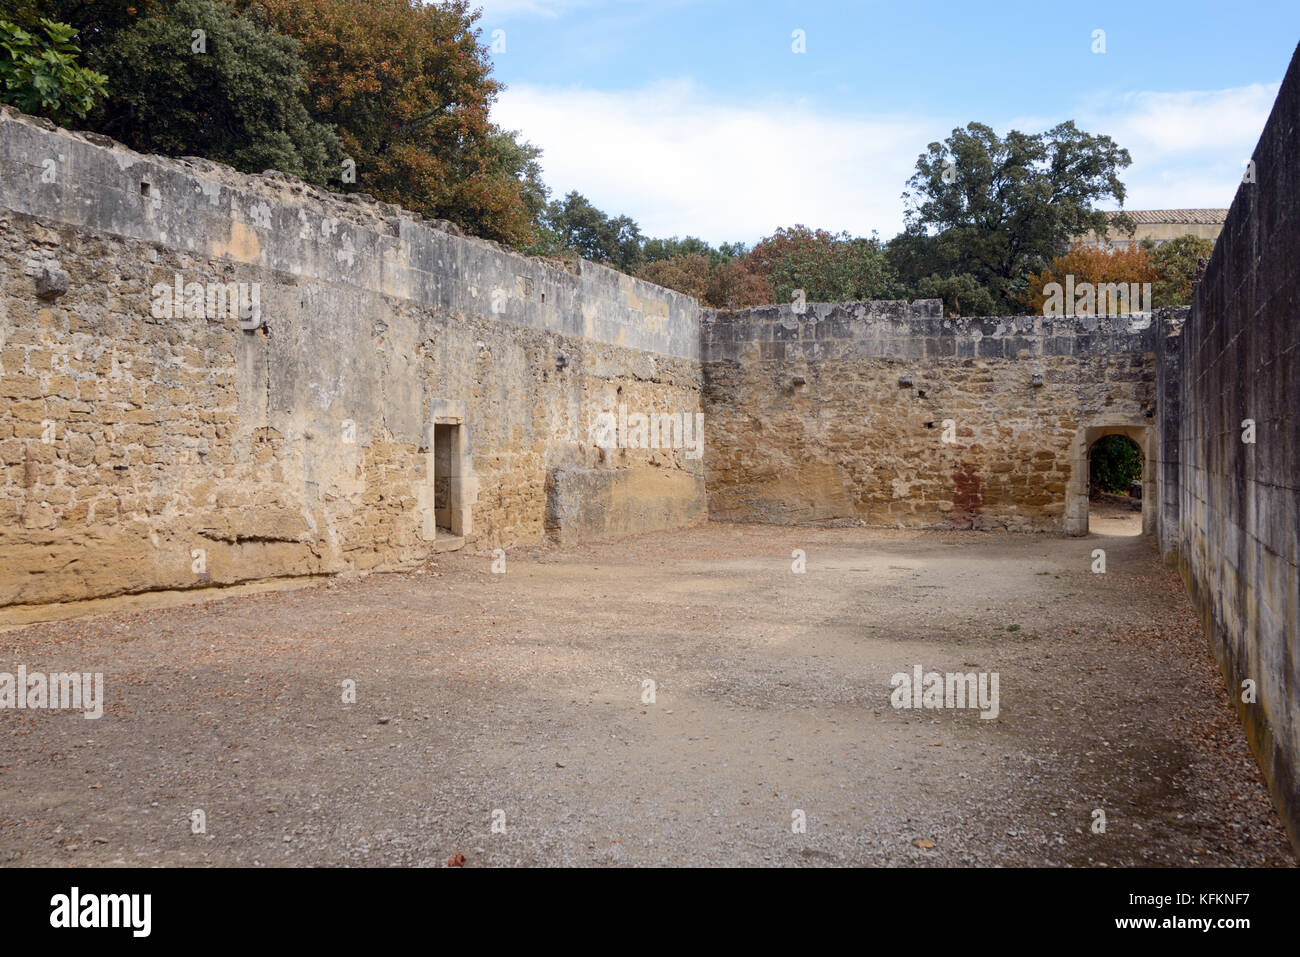 Jeu de Paume Tennis Court (c16th) Suze-la-Rousse. Built so Charles IX could play on his visit in 1564. One of few courts still surviving in France. Stock Photo